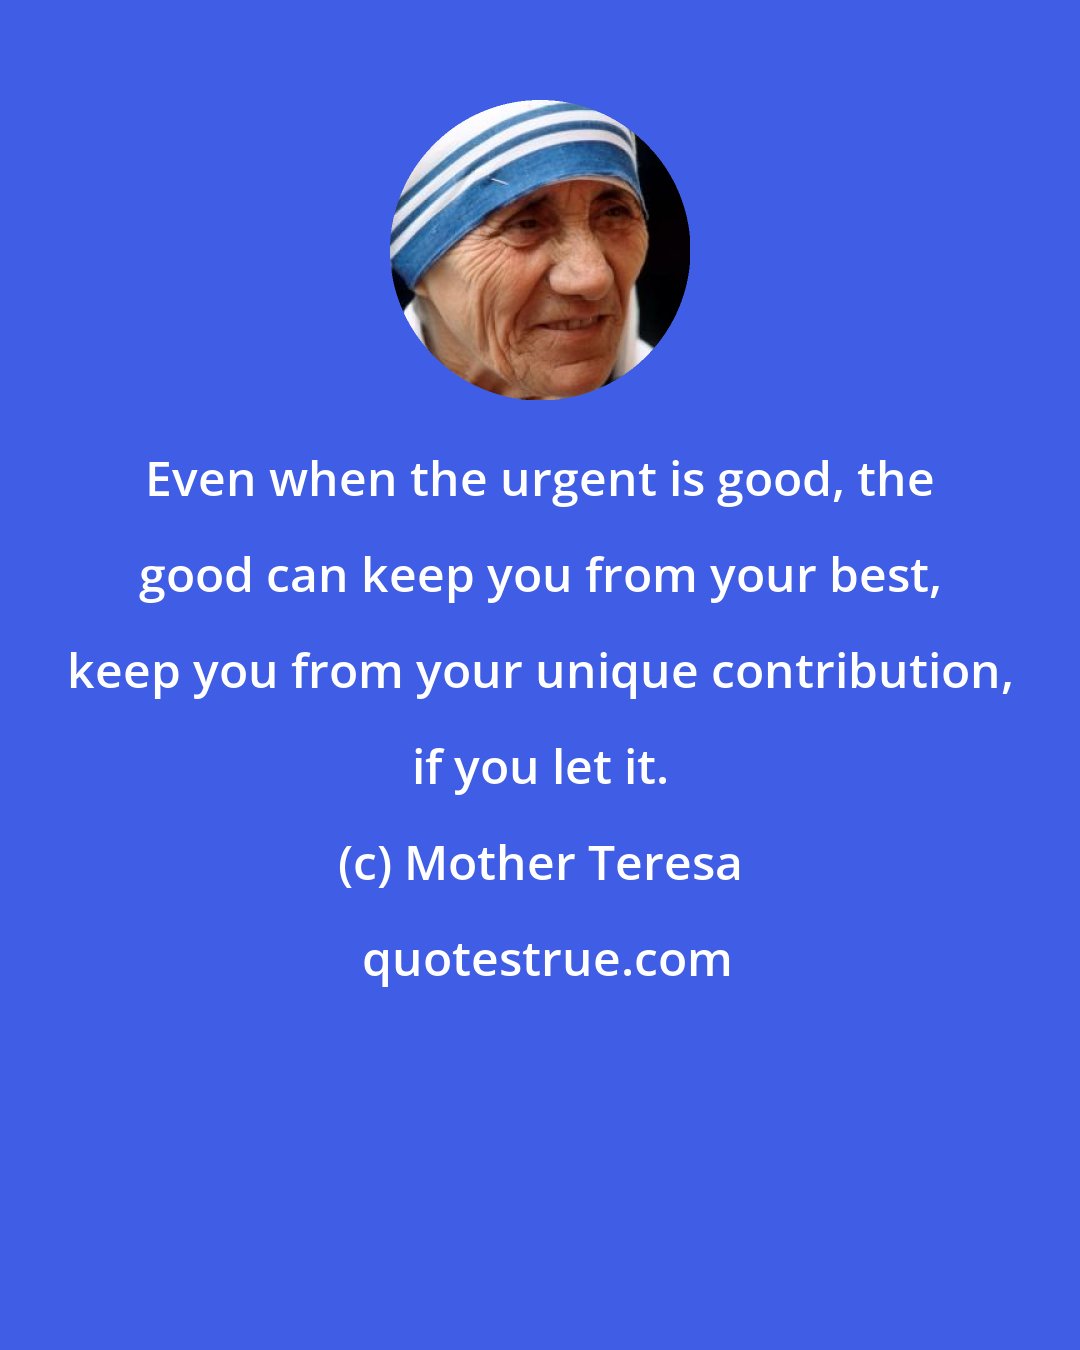 Mother Teresa: Even when the urgent is good, the good can keep you from your best, keep you from your unique contribution, if you let it.